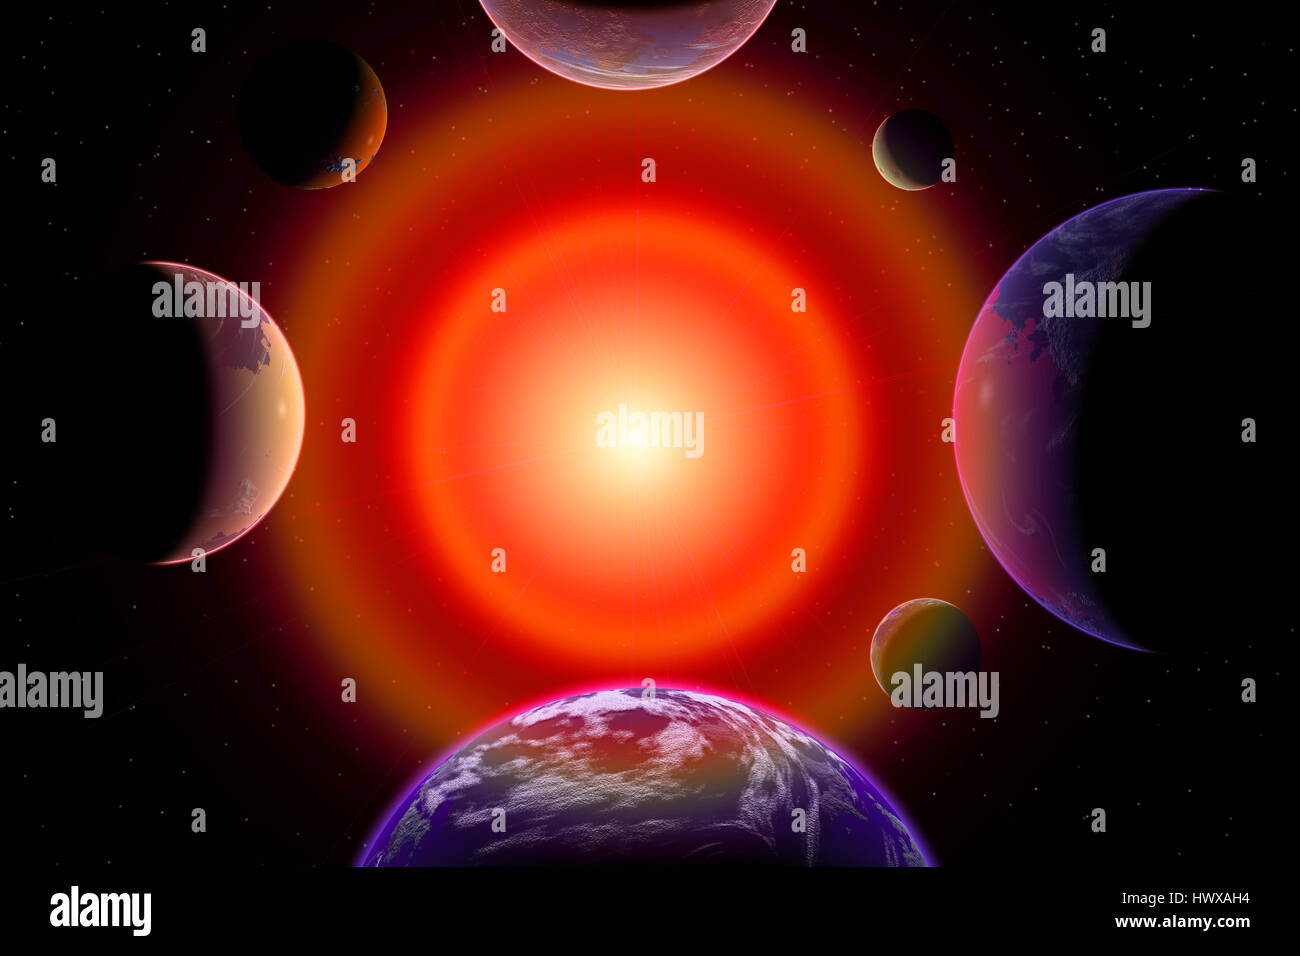 The Trappist Star System Consisting Of 7 Exoplanets Stock Photo